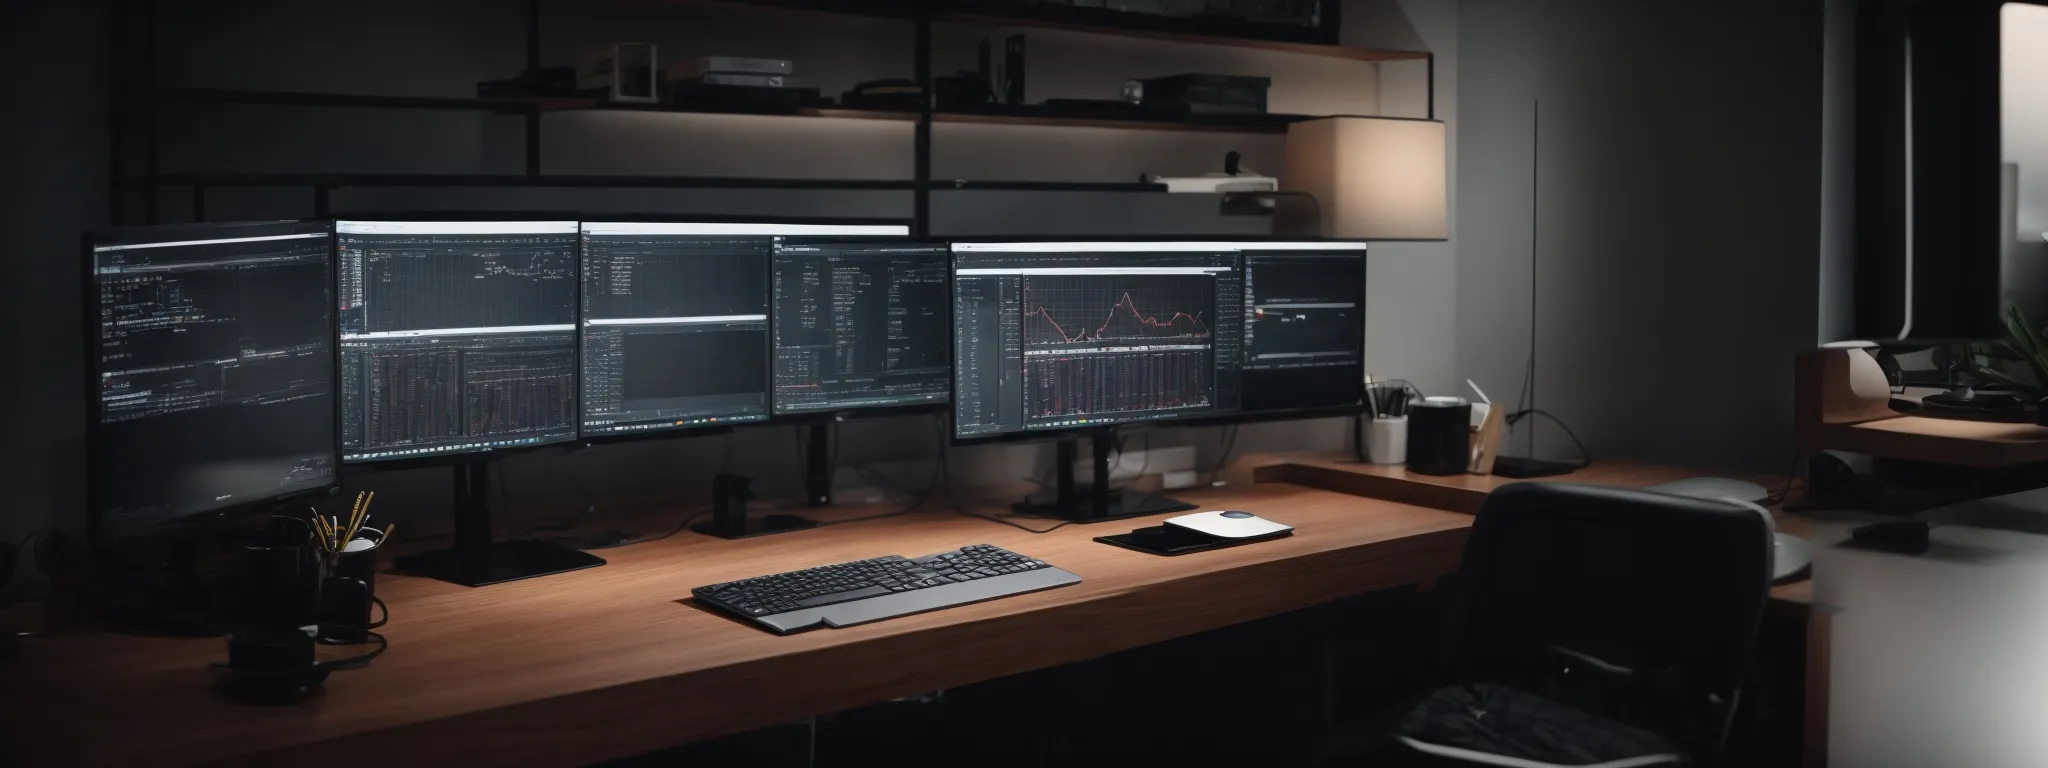 a sleek, modern computer desk with dual monitors displaying code and analytical data on an aesthetically minimalistic website interface.